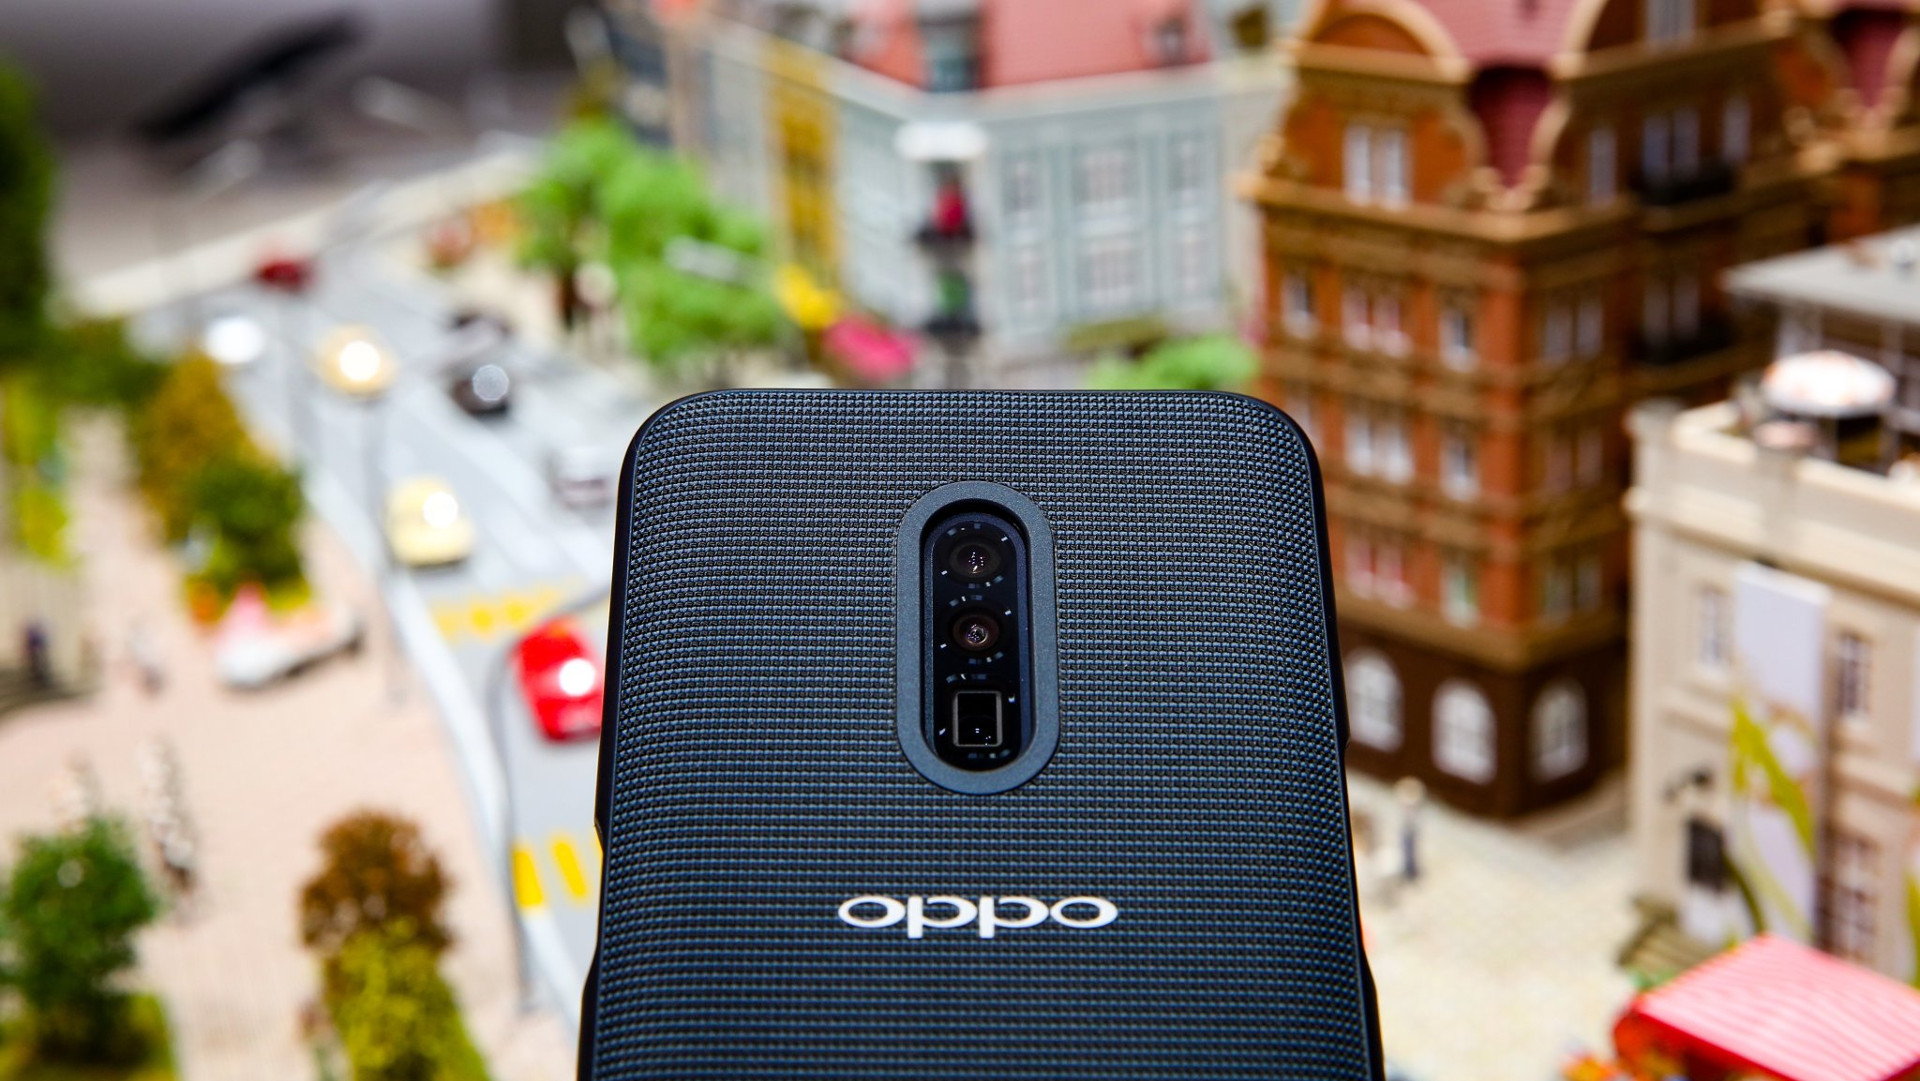 An Oppo phone with 10x zoom technology.